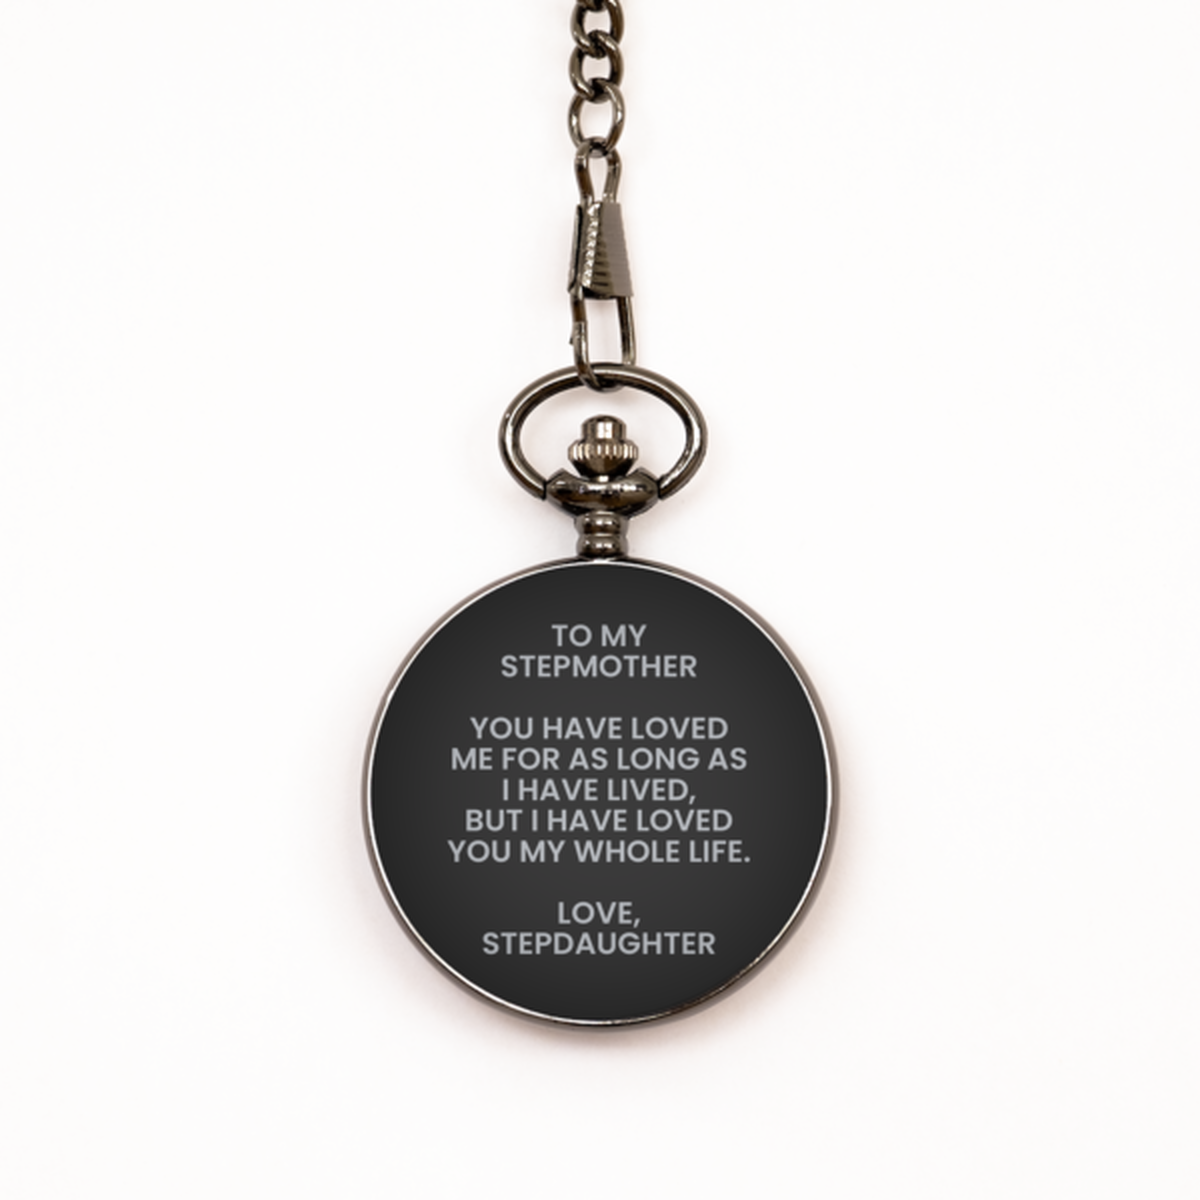 To My Stepmother Black Pocket Watch, Loved You My Whole Life, Mothers Day Gifts For Stepmother From Stepdaughter, Birthday Gifts For Women